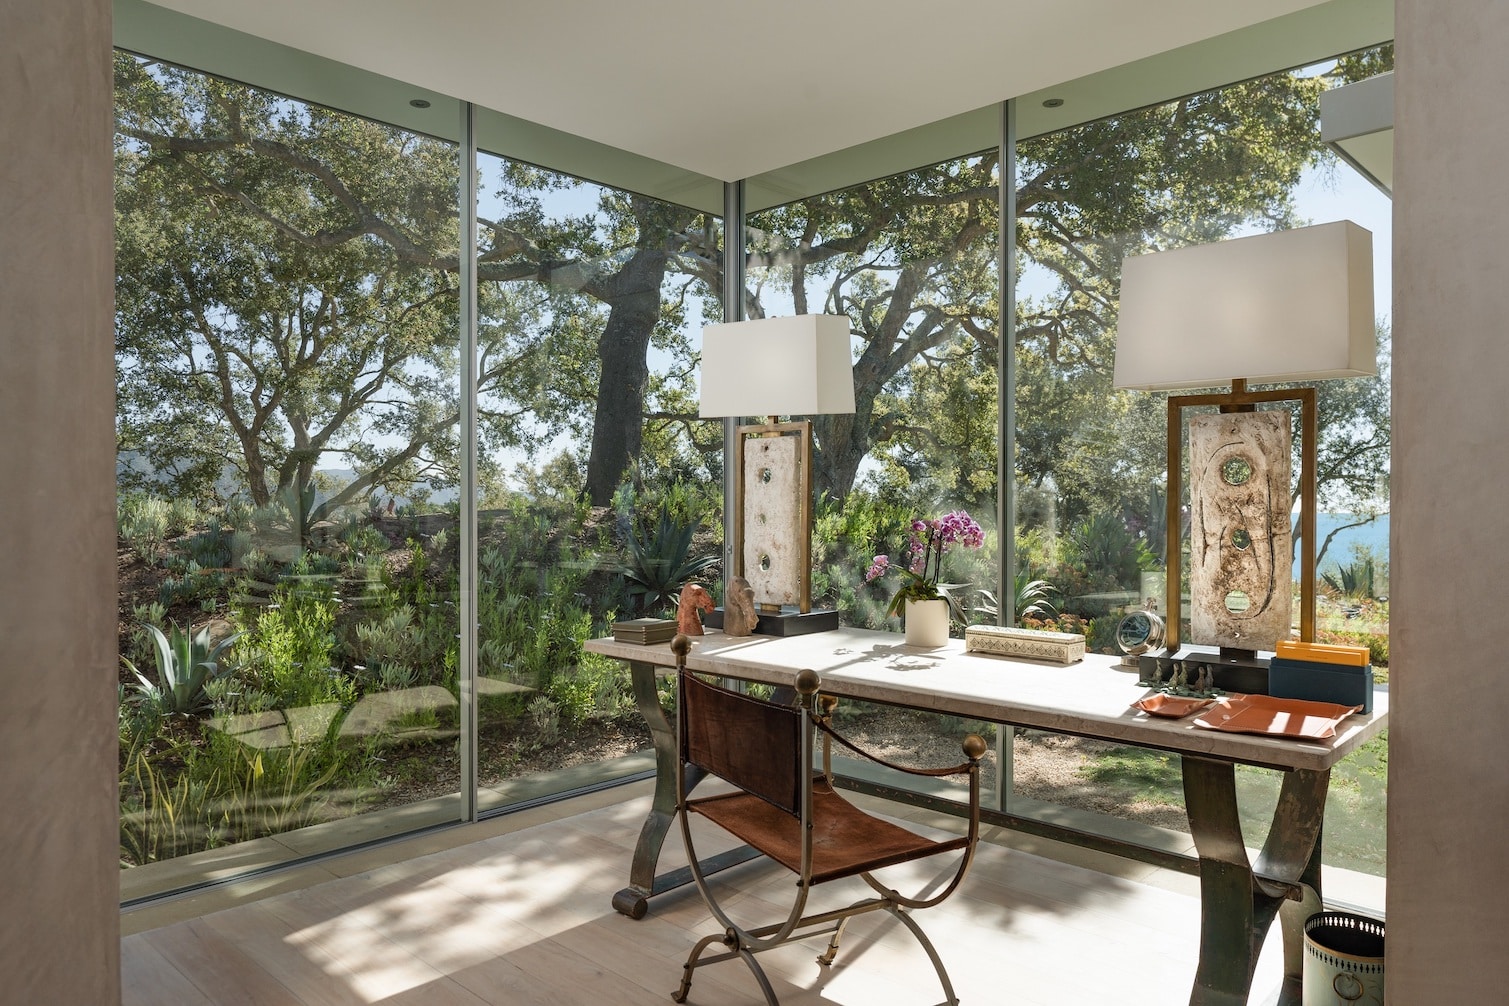 A home office with a view of trees and lush landscape